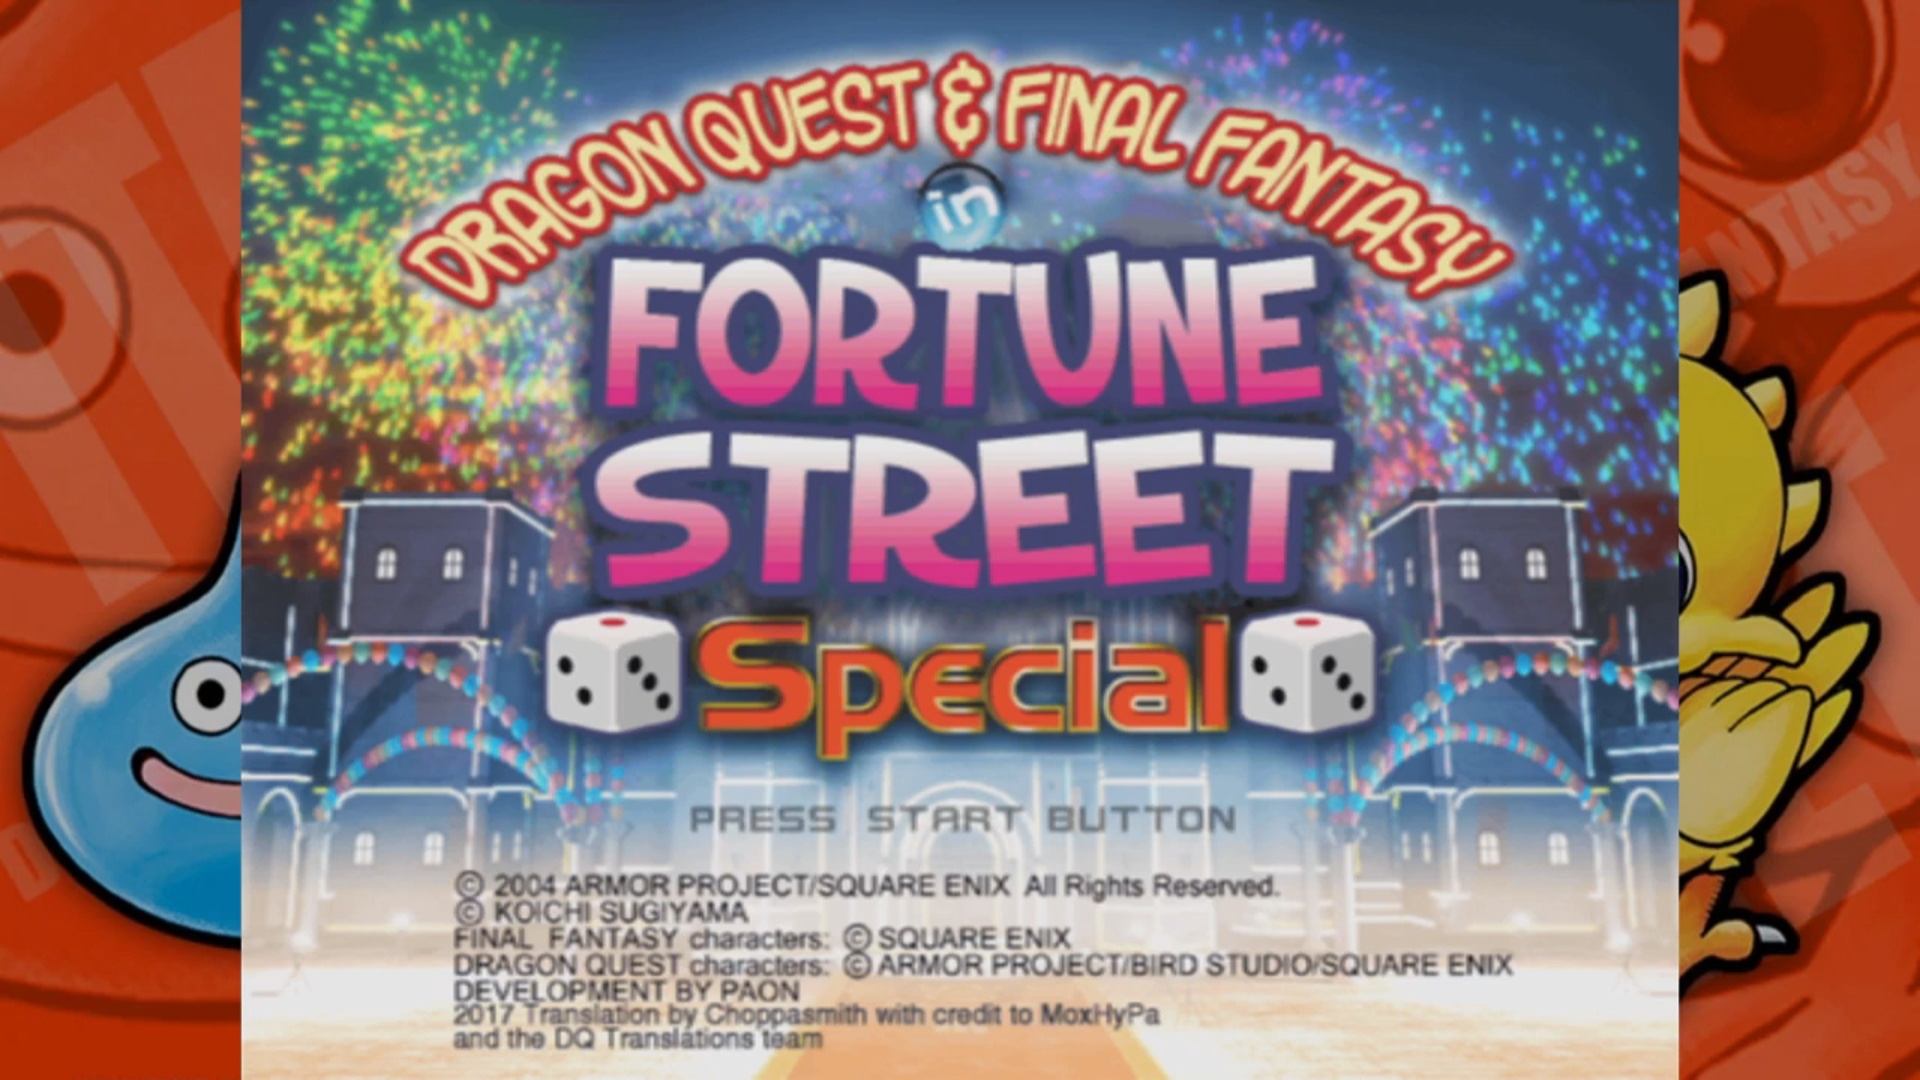 Let's Mess Around on Fortune Street Special